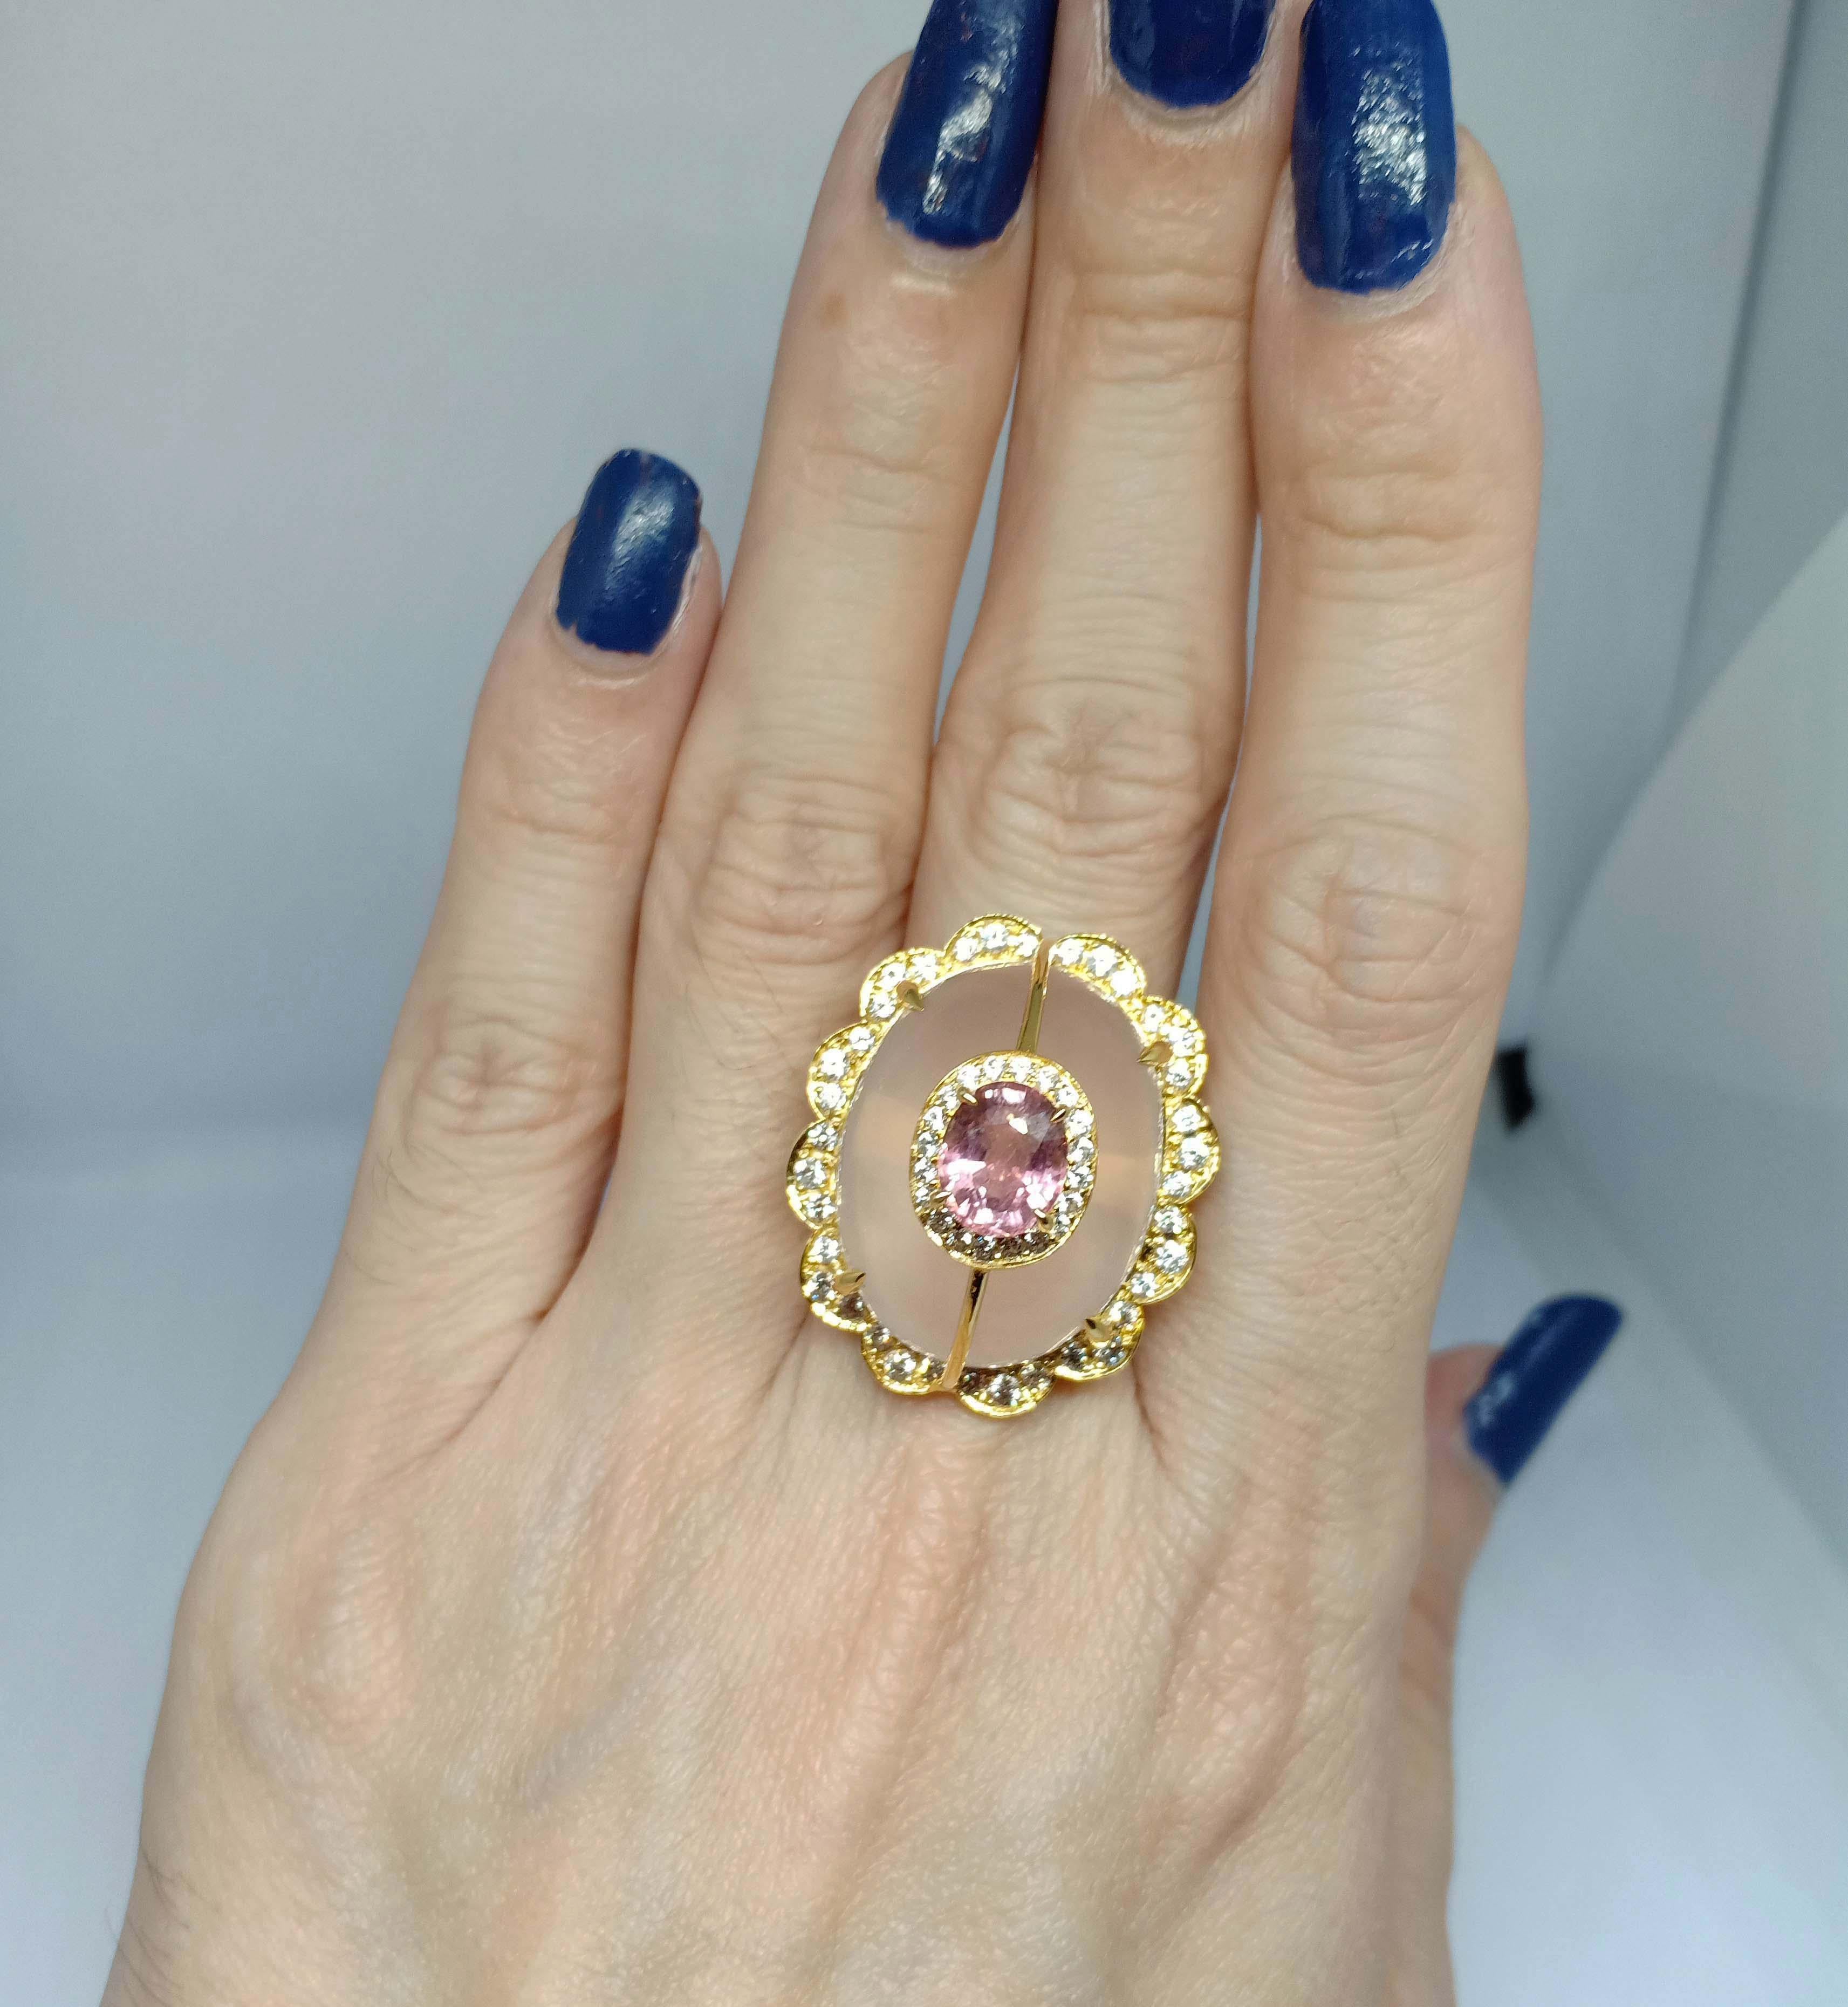 33.43 Cts. Rose Quartz Ring. Sterling Silver on 18K Gold Plated. For Sale 2